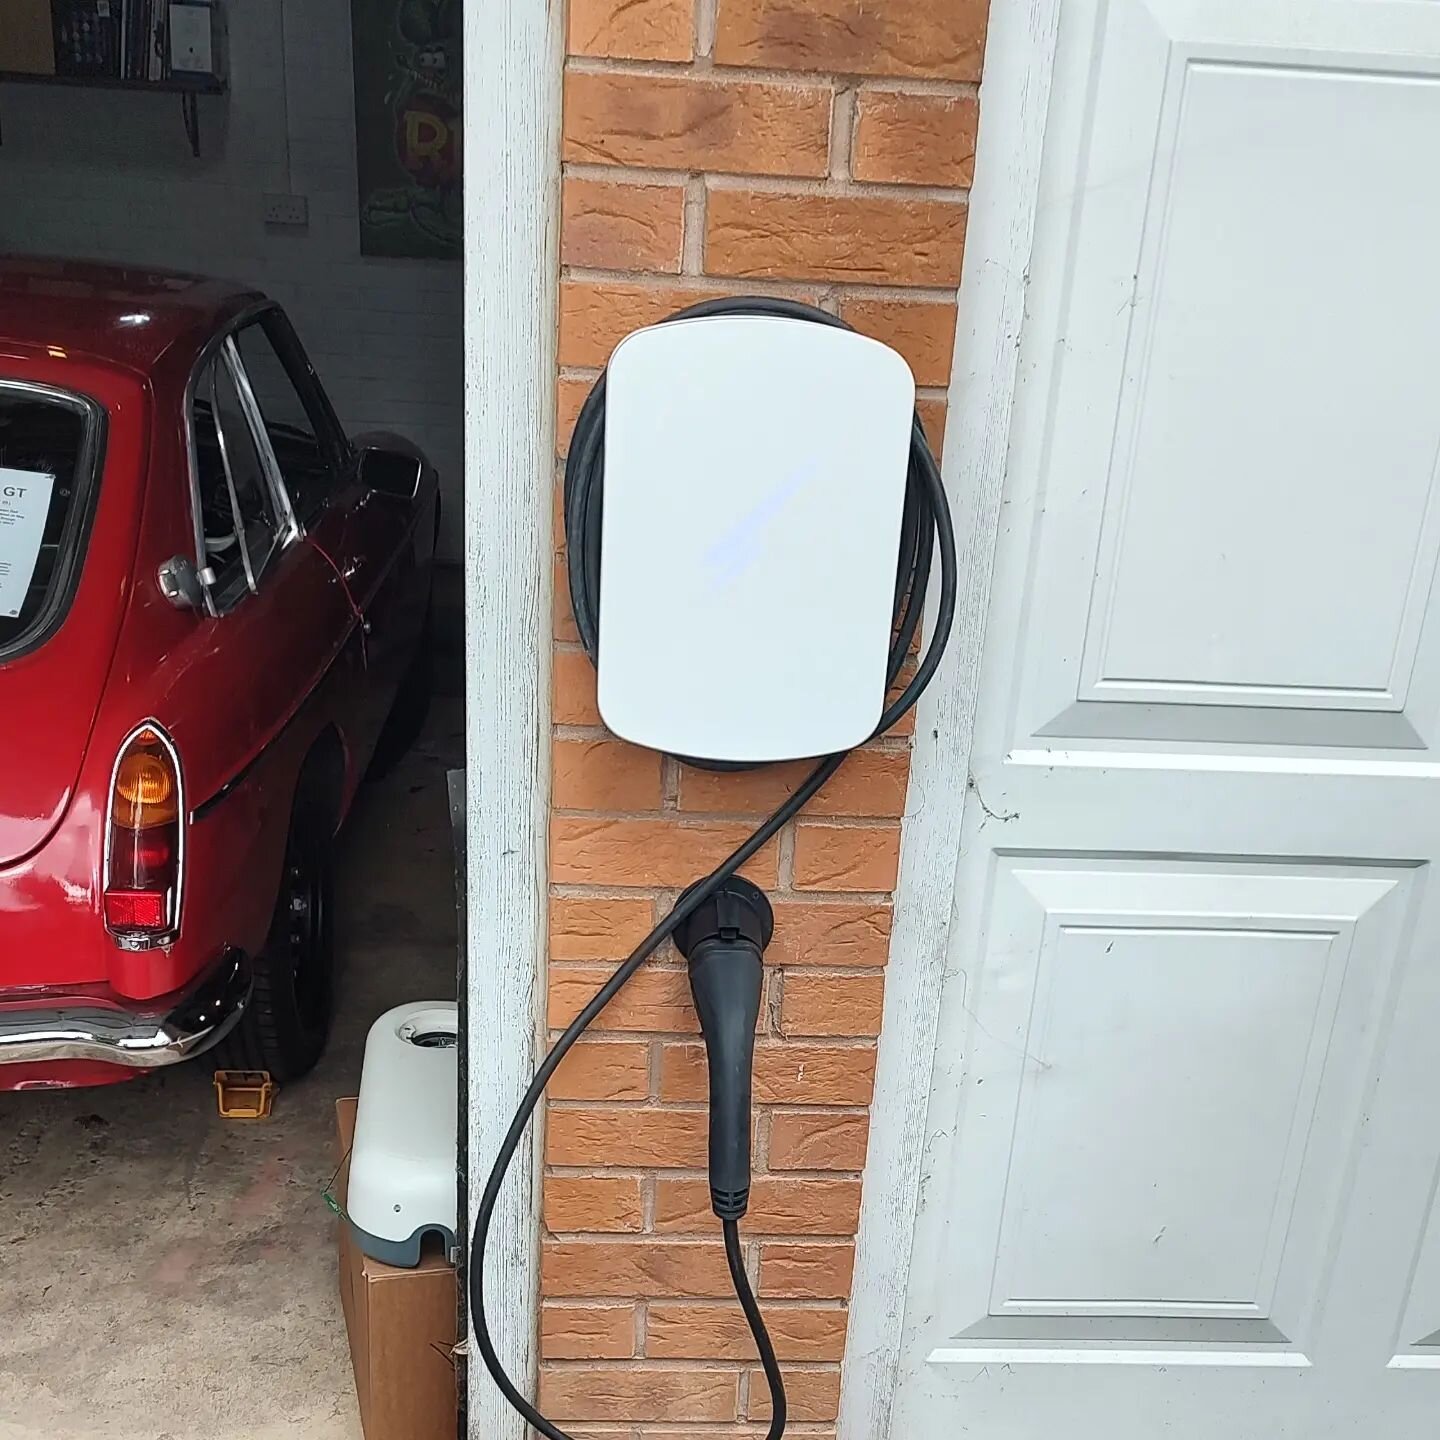 Out with the old in with a new @hypervoltuk today, with a new RCD and spd board. #evcharger #evnorthampton #electricvehicle #electricvehiclenorthamptonshire #hypervolt